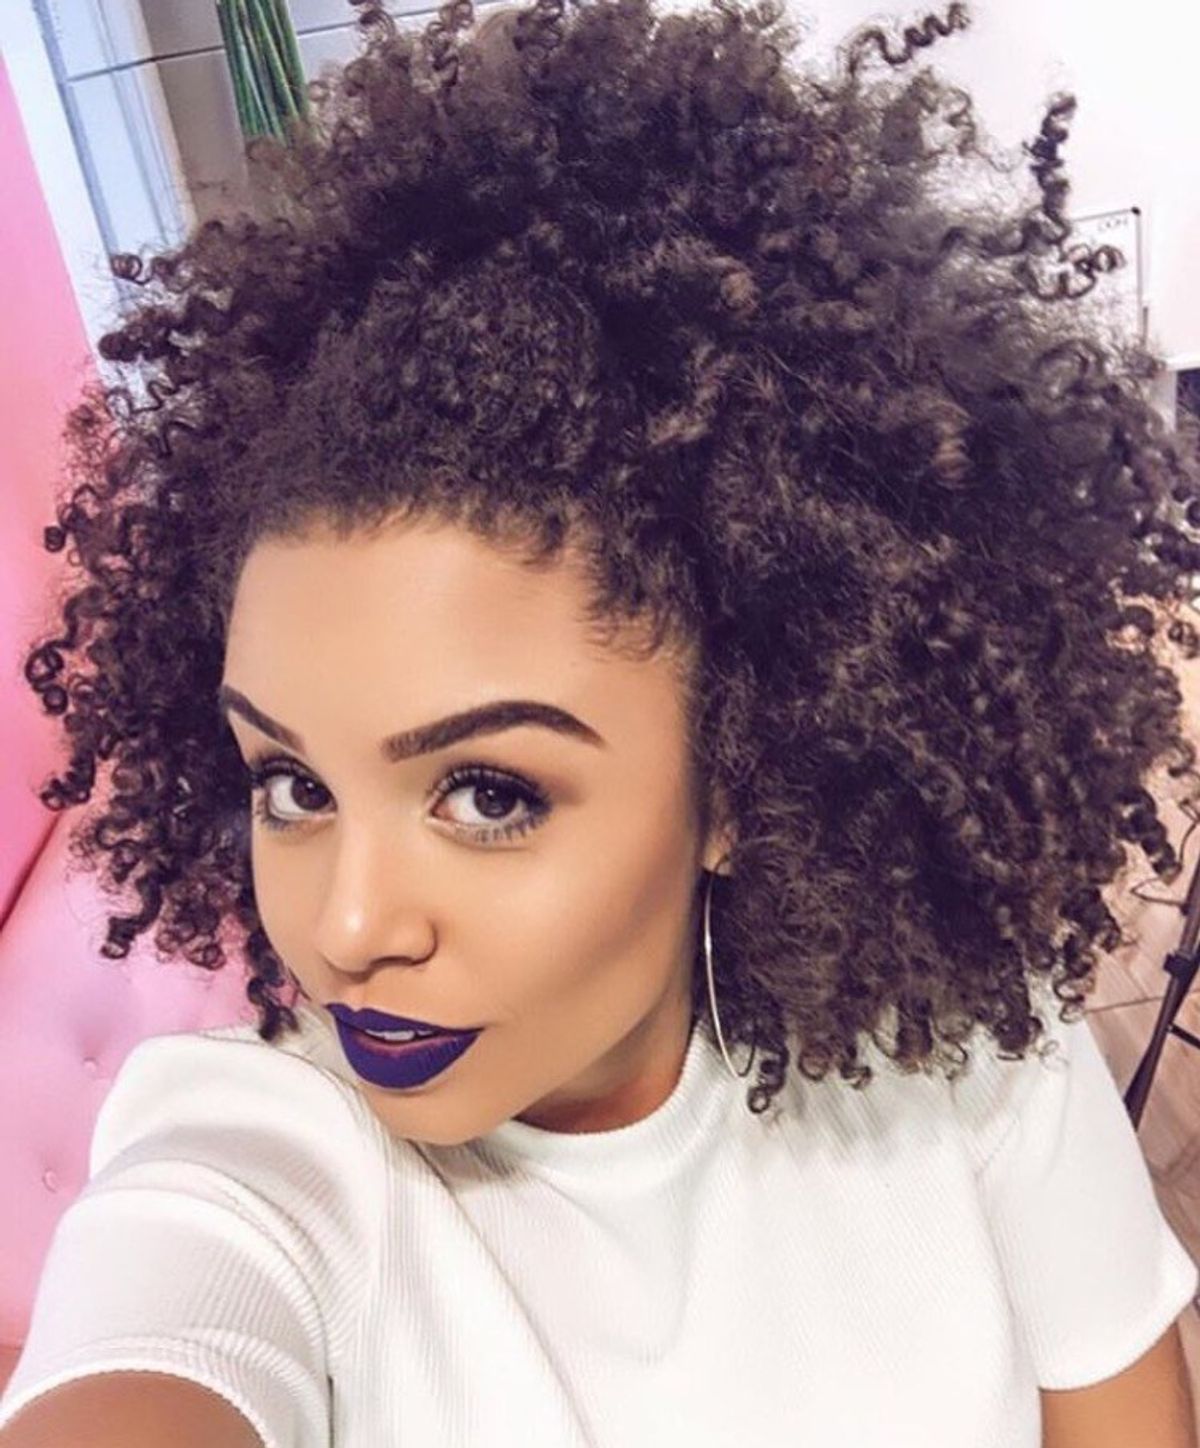 It's Totally "Natural": The Struggles Of Having Natural Hair